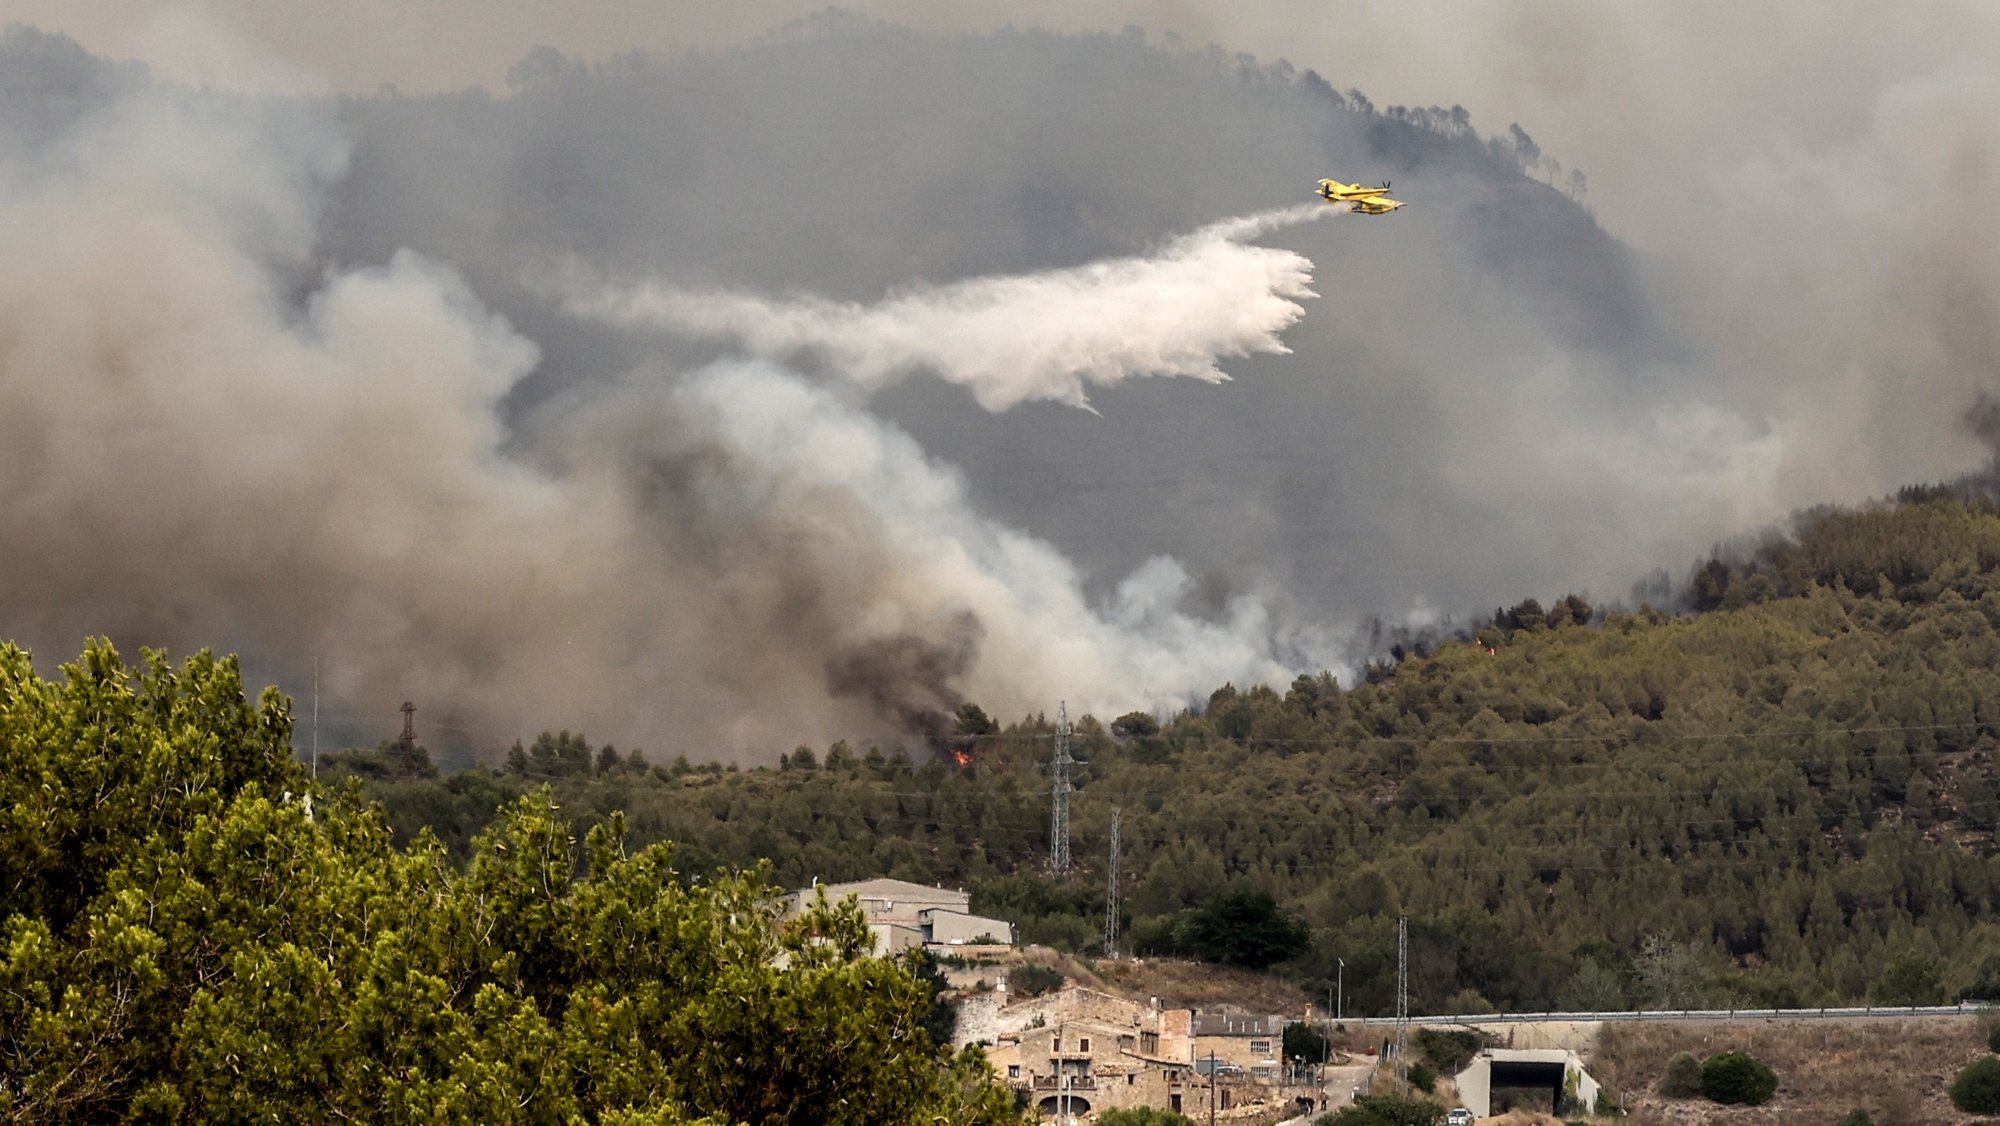 epa10076248 A firefighting aircraft drops water on a forest fire originated in Pont de Vilomara, Spain, 17 July 2022. The fire has burnt 440 hectares so far.  EPA/TONI ALBIR